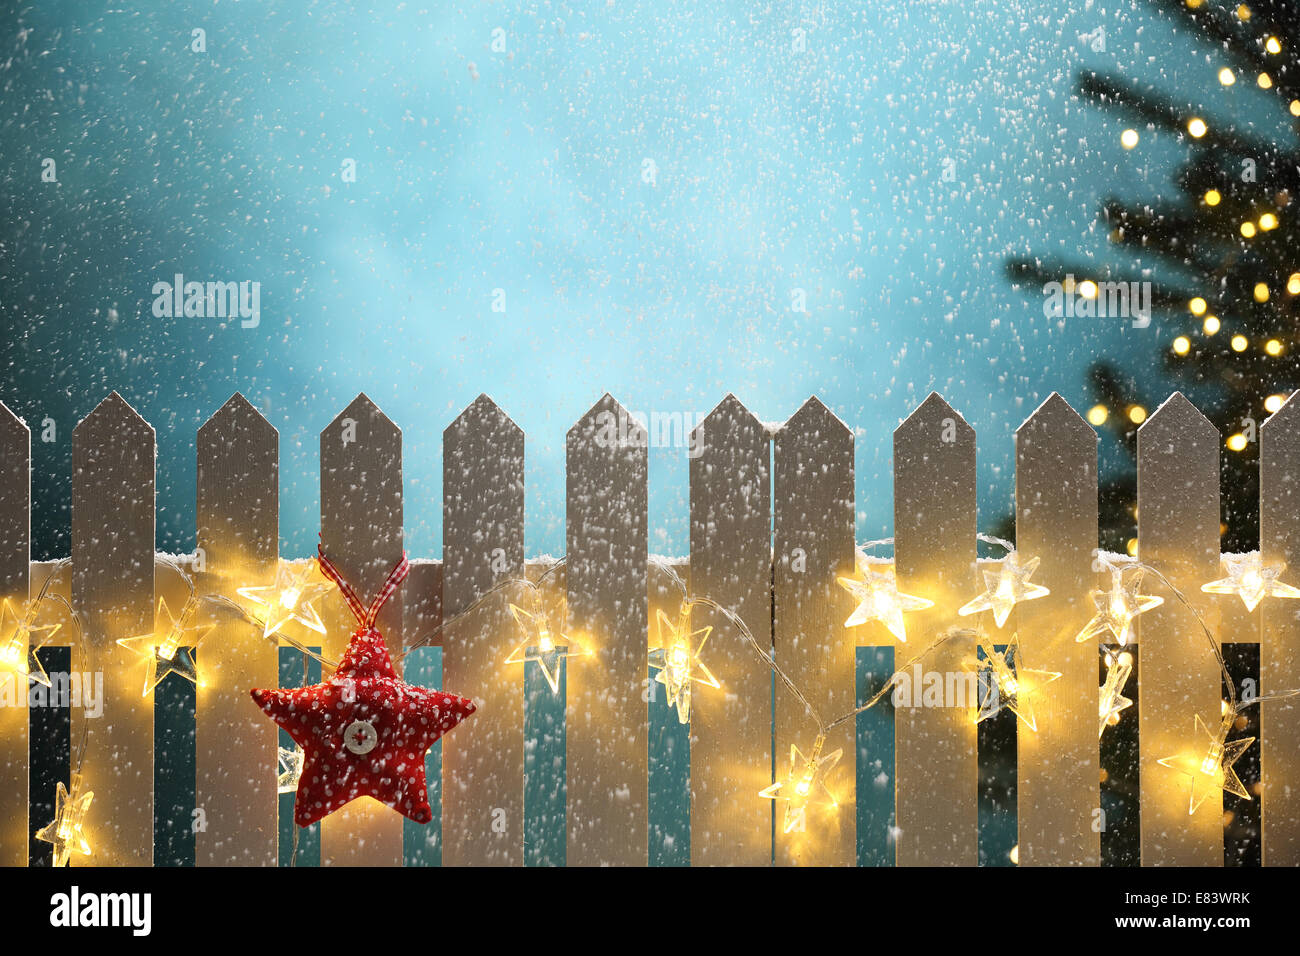 Red fabric star and lights hanging on fence at snowy night,Christmas concept. Stock Photo